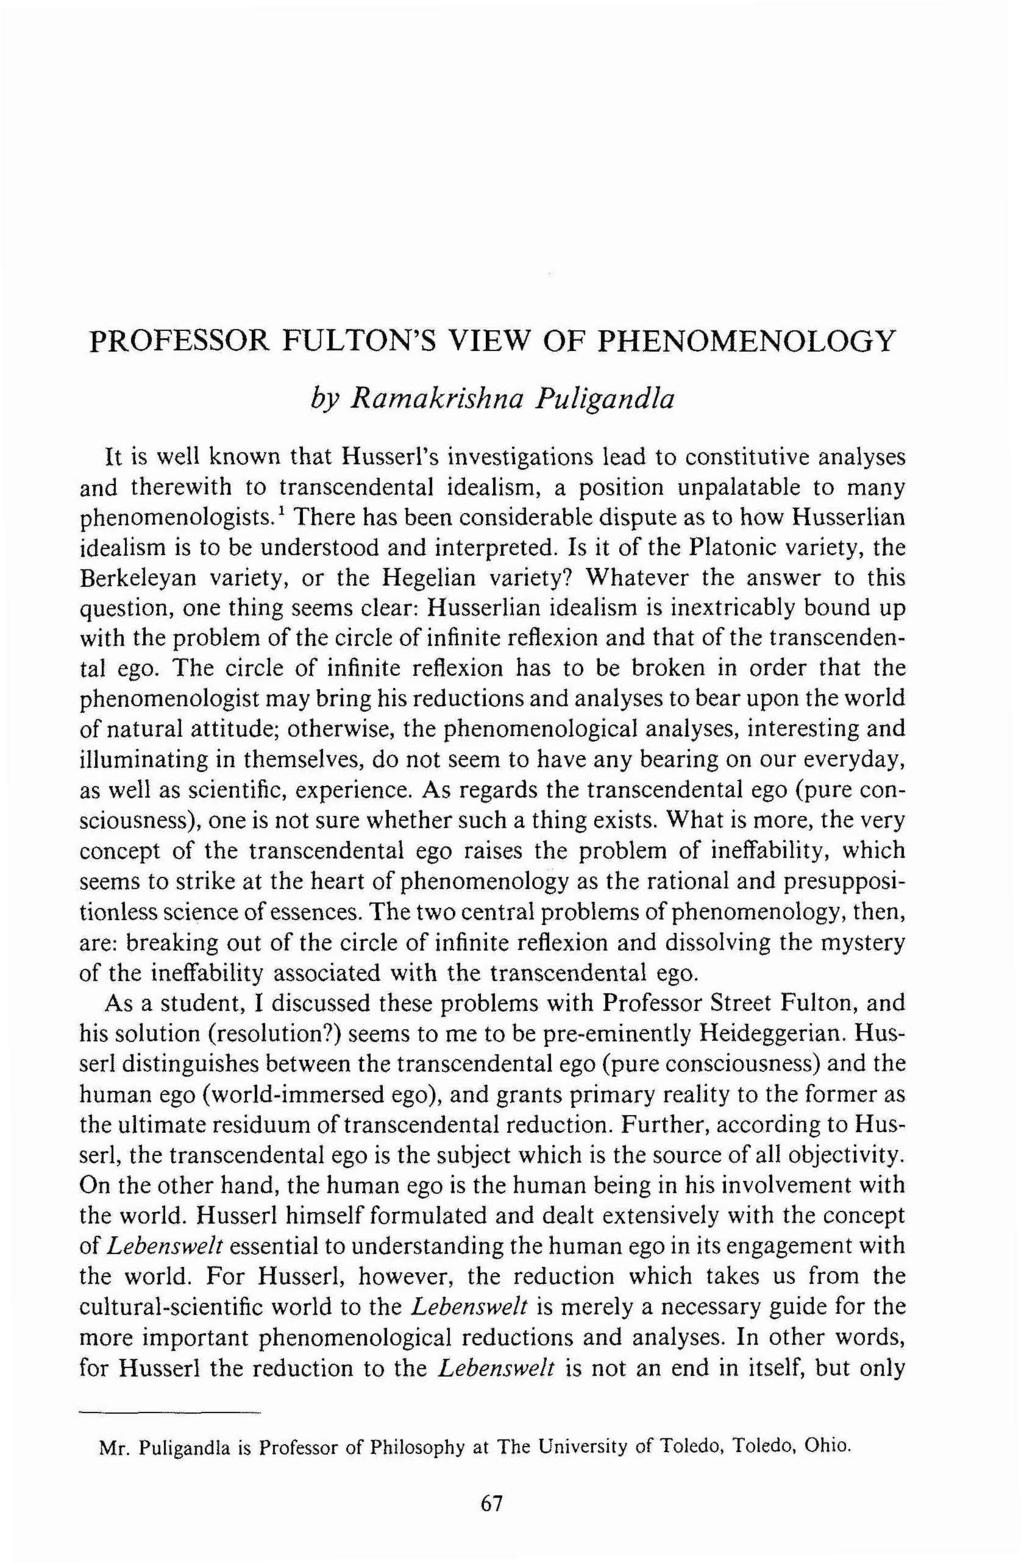 PROFESSOR FULTON'S VIEW OF PHENOMENOLOGY by Ramakrishna Puligandla It is well known that Husserl's investigations lead to constitutive analyses and therewith to transcendental idealism, a position